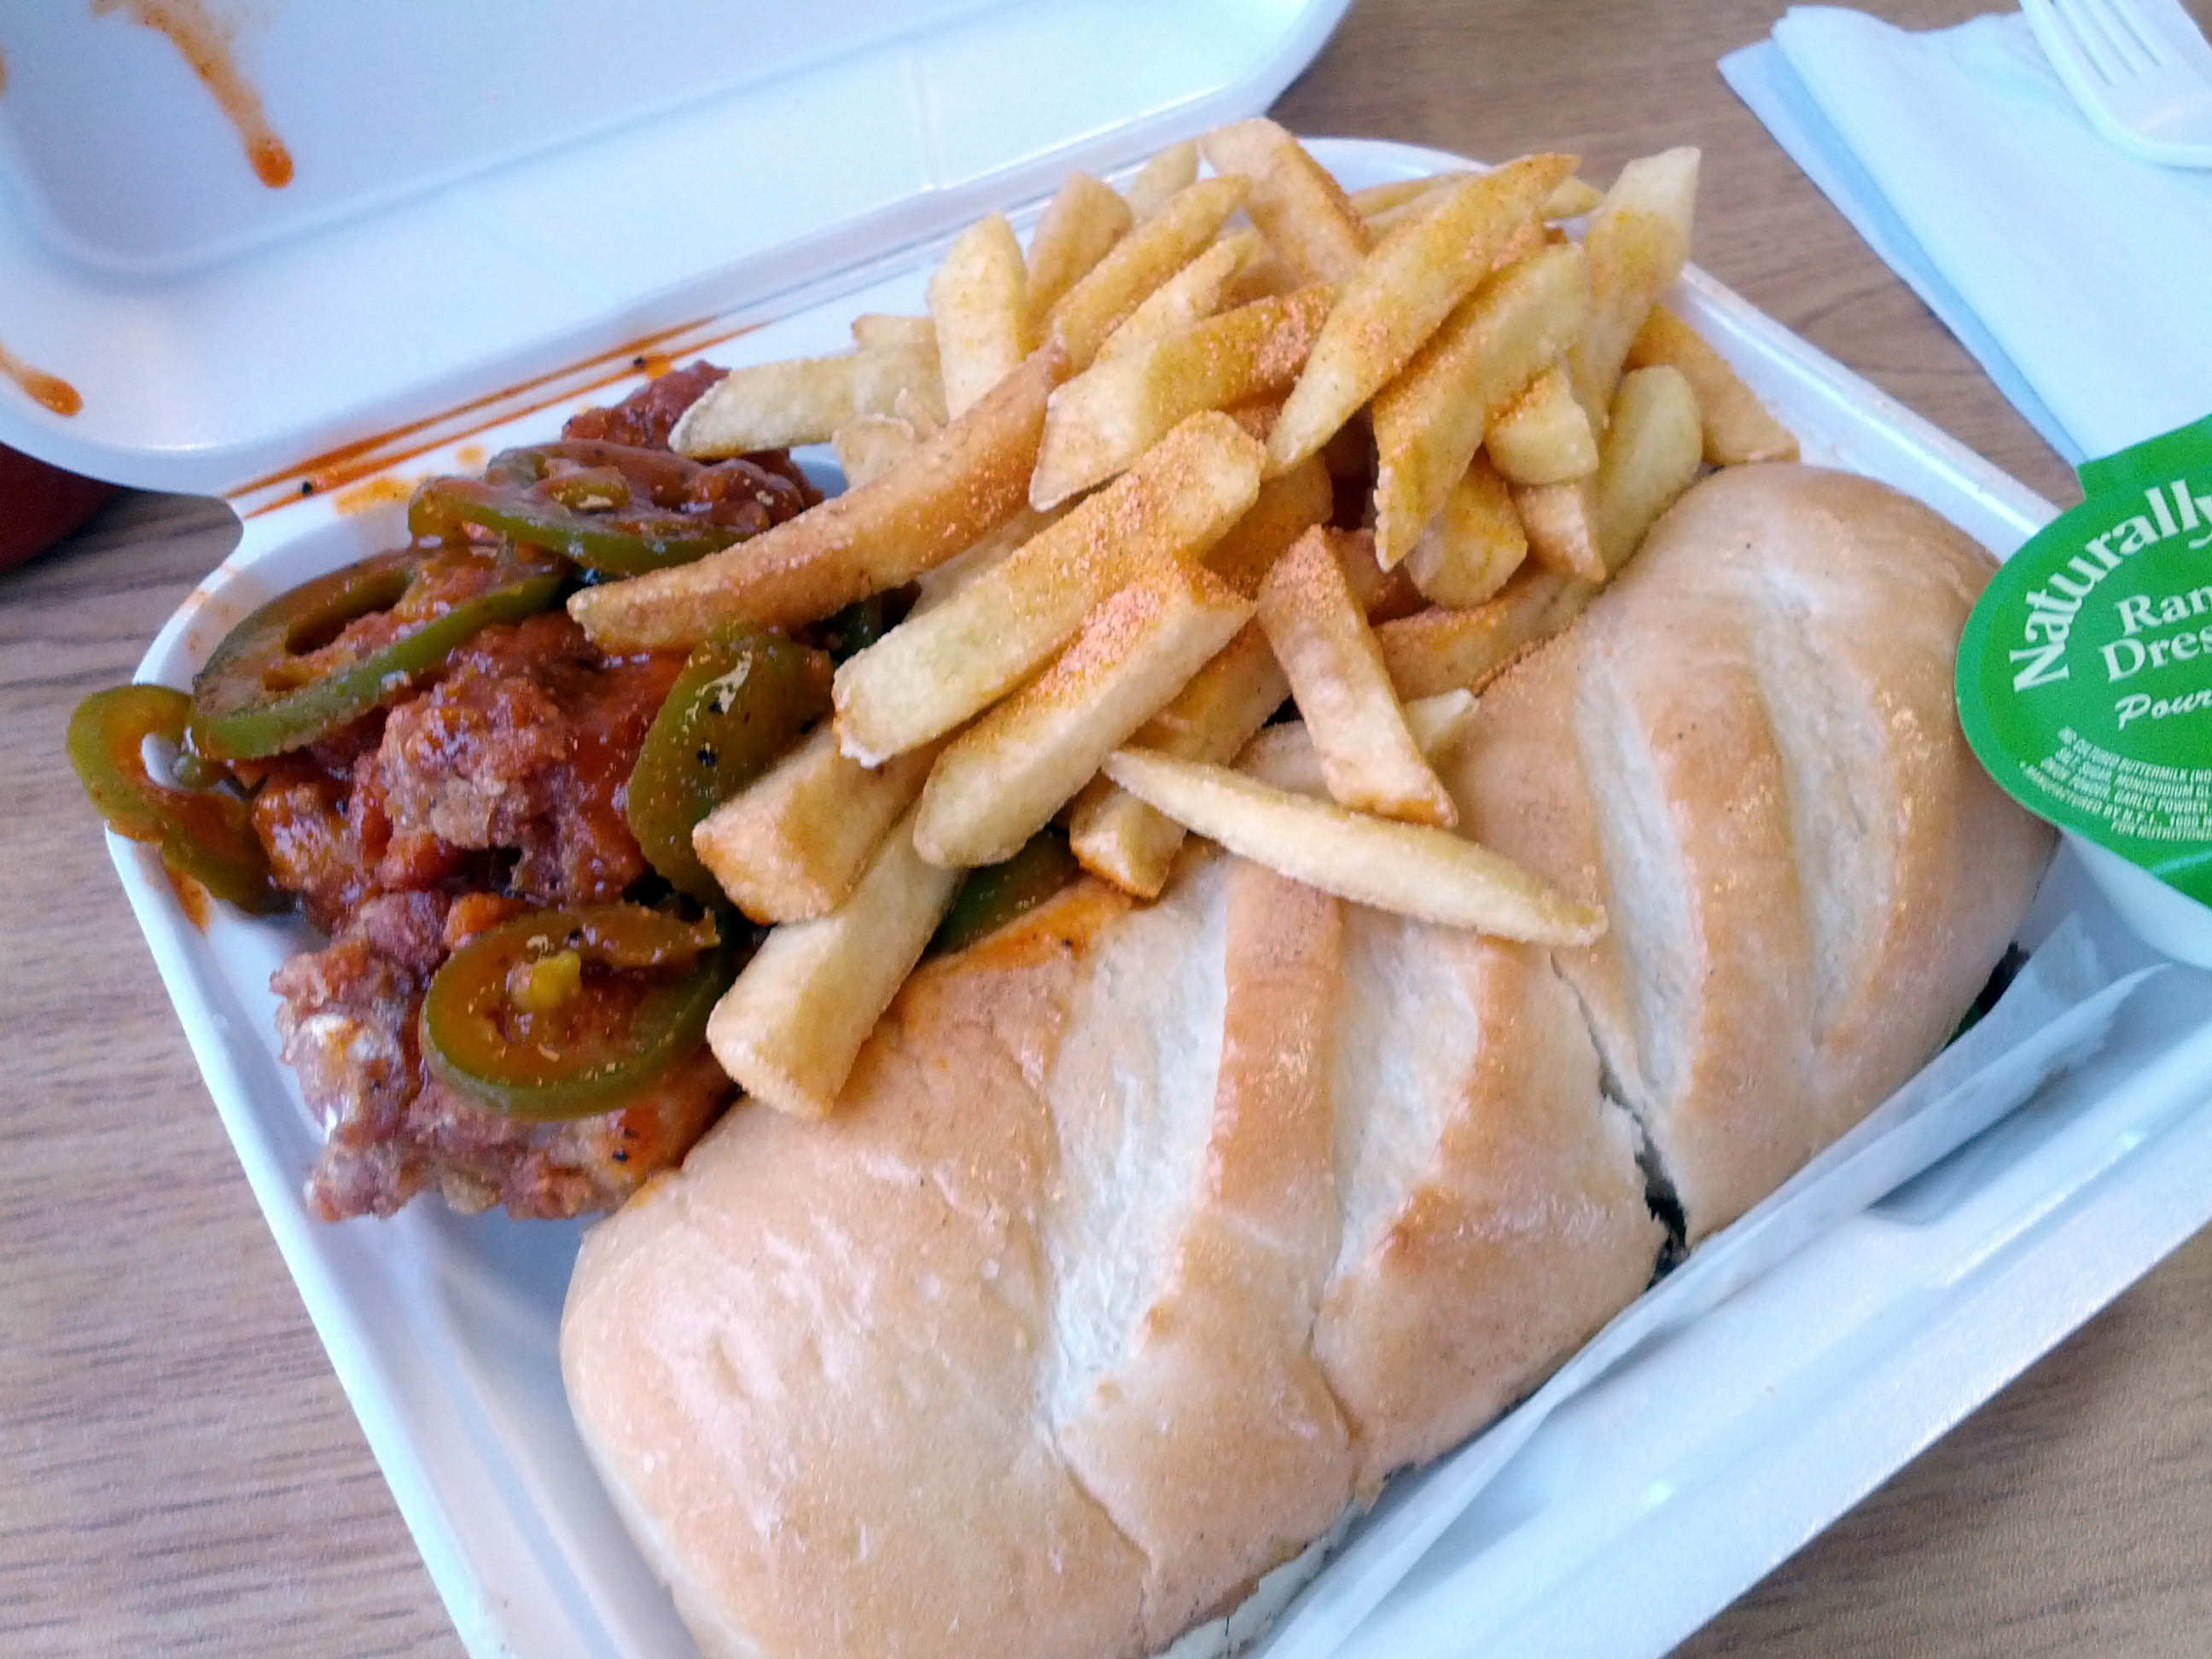 Philly cheesesteak, mexican hot wings, and fries